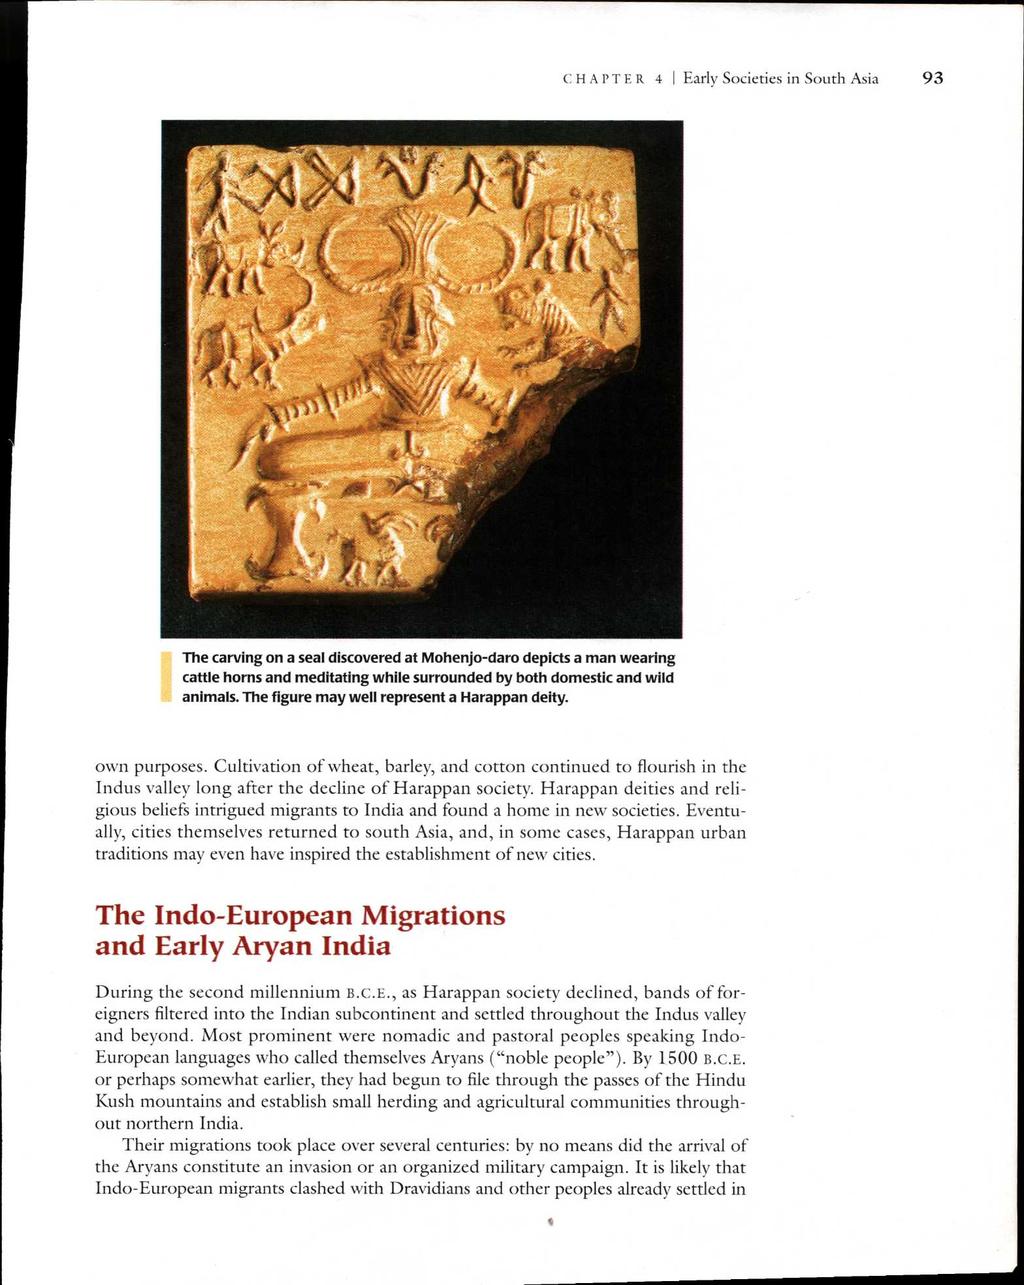 CHAPTER 4 I Early Societies in South Asia 93 The carving on a seal discovered at Mohenjo-daro depicts a man wearing cattle horns and meditating while surrounded by both domestic and wild animals.